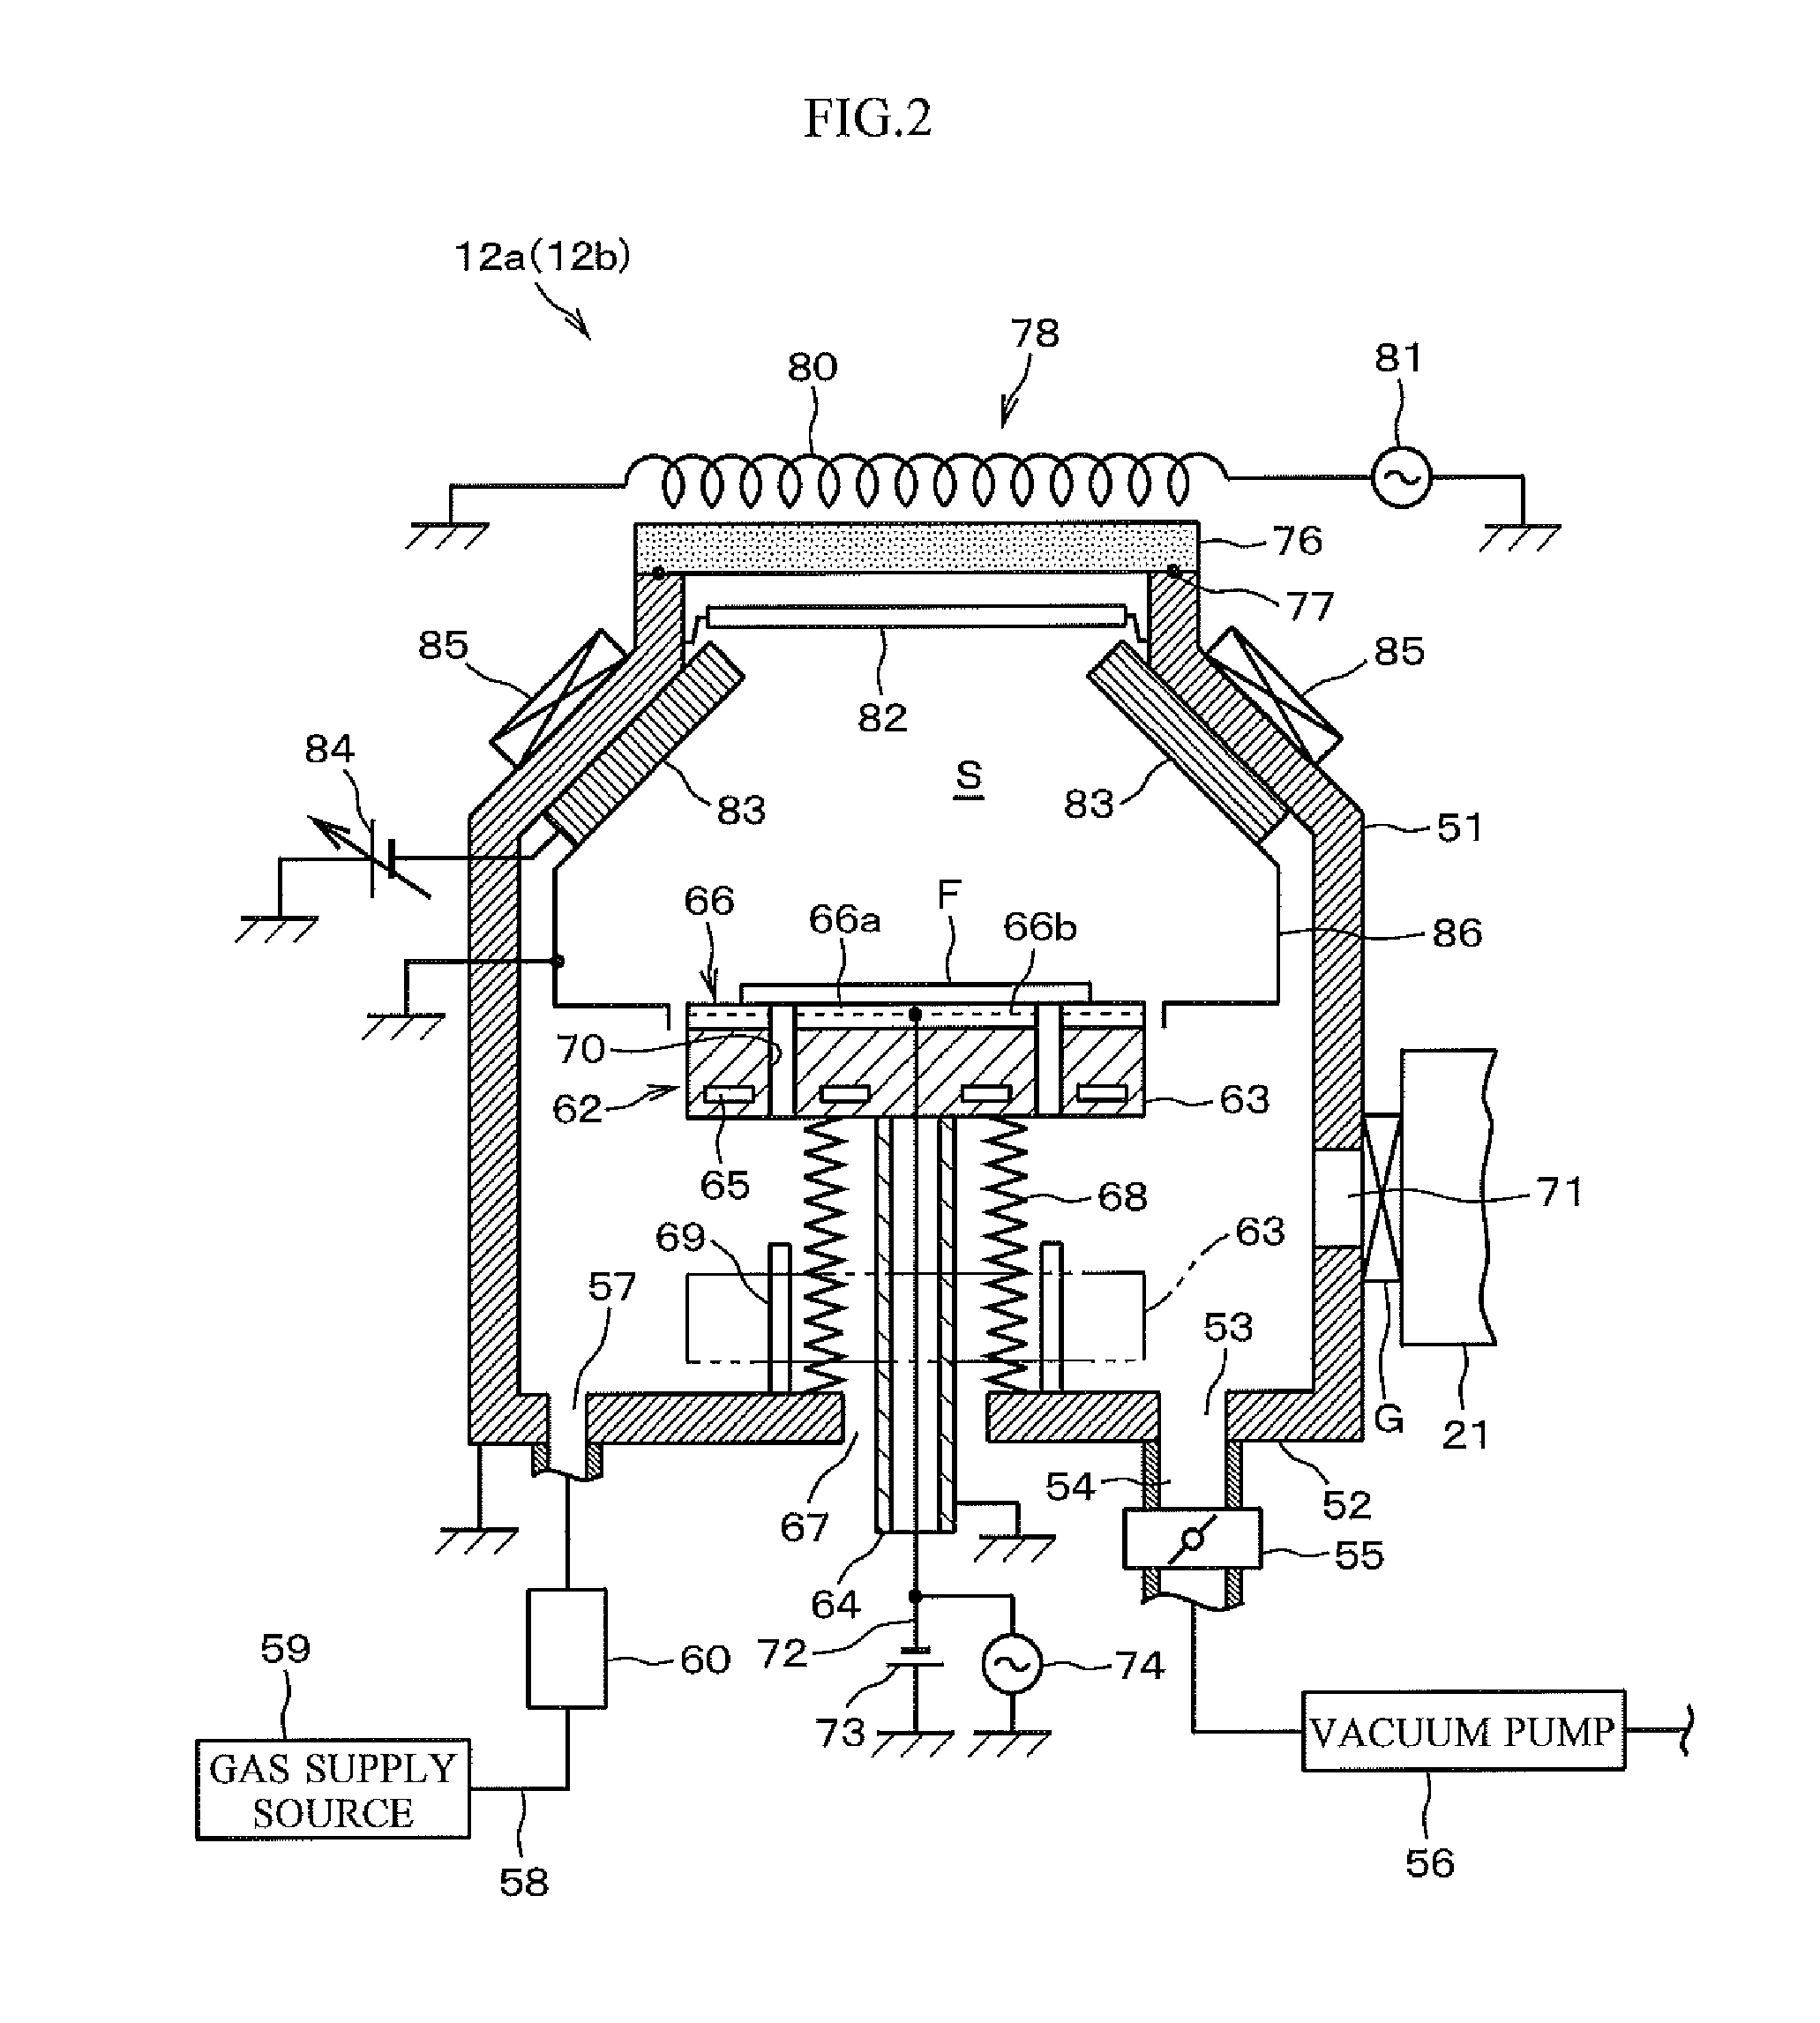 Copper wiring forming method, film forming system, and storage medium